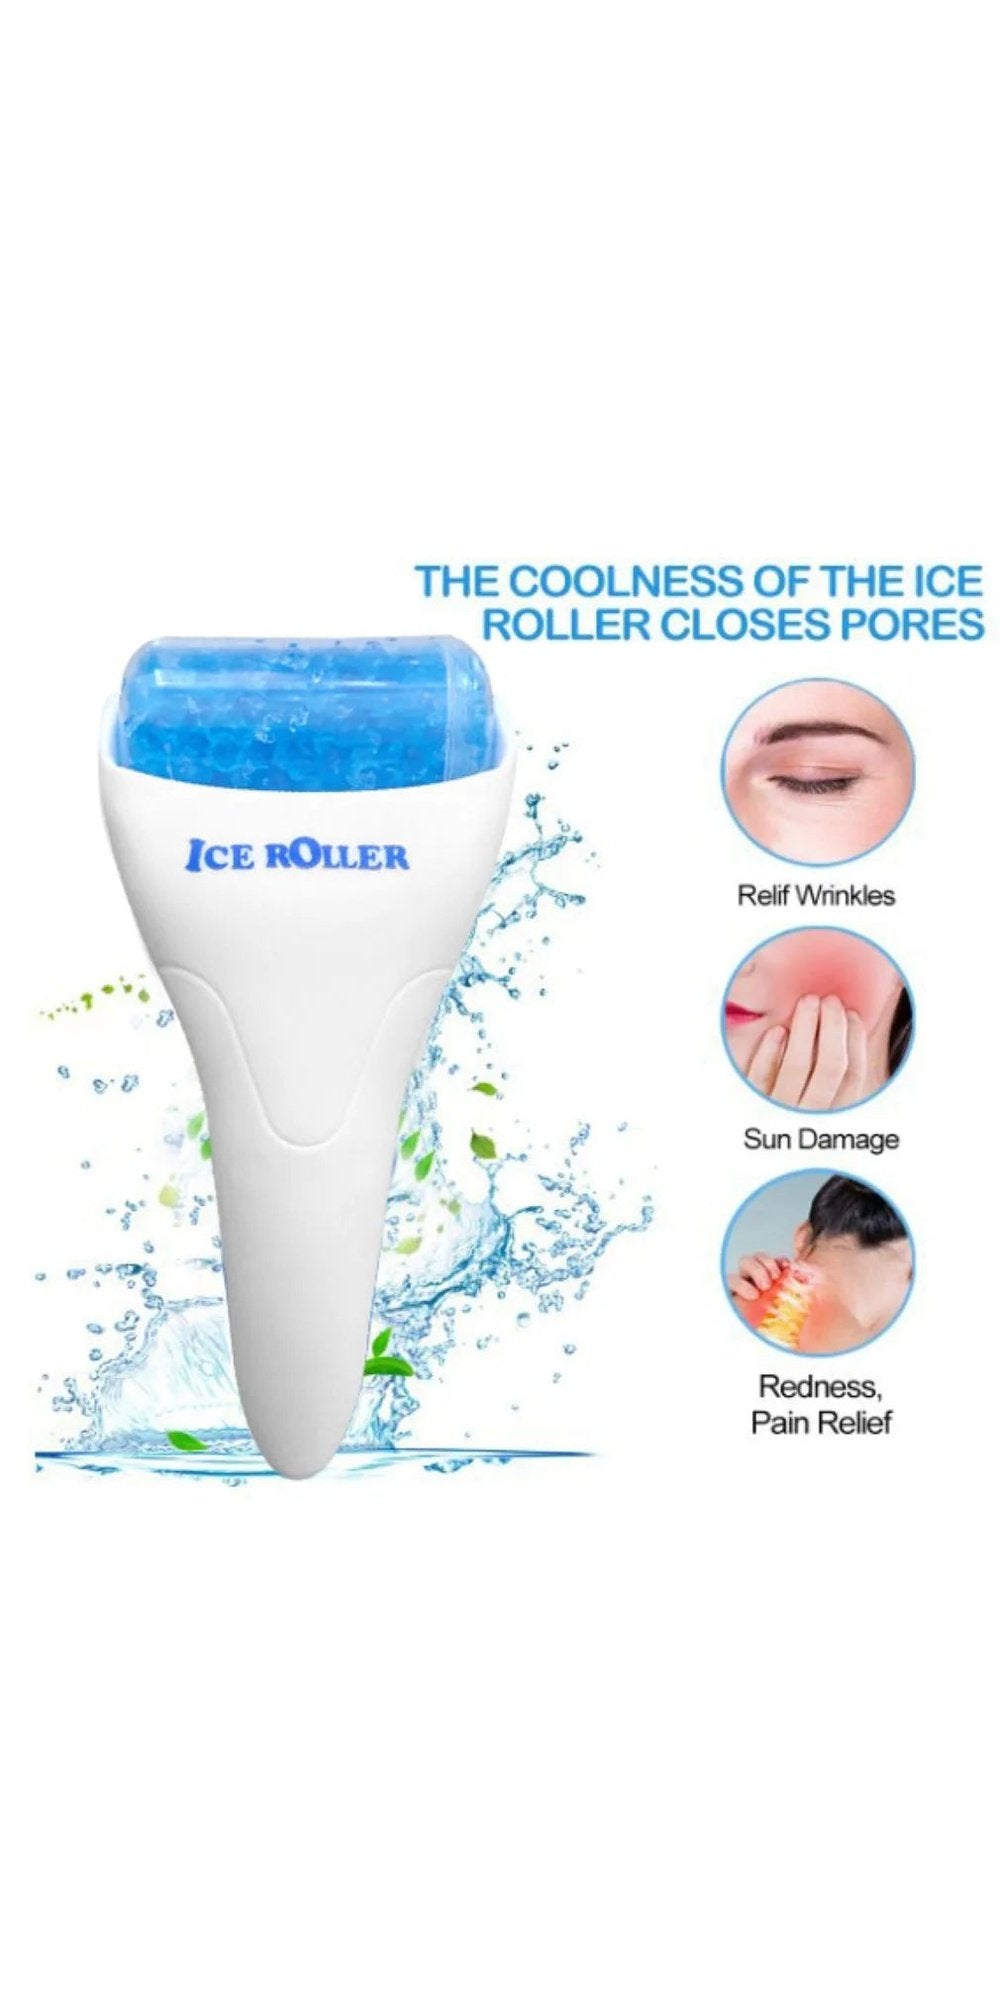 Reusable Facial Roller Cooling Ice Roller Massager Skin Lifting Tool Face Lifting Massage for Muscle Cold Therapy